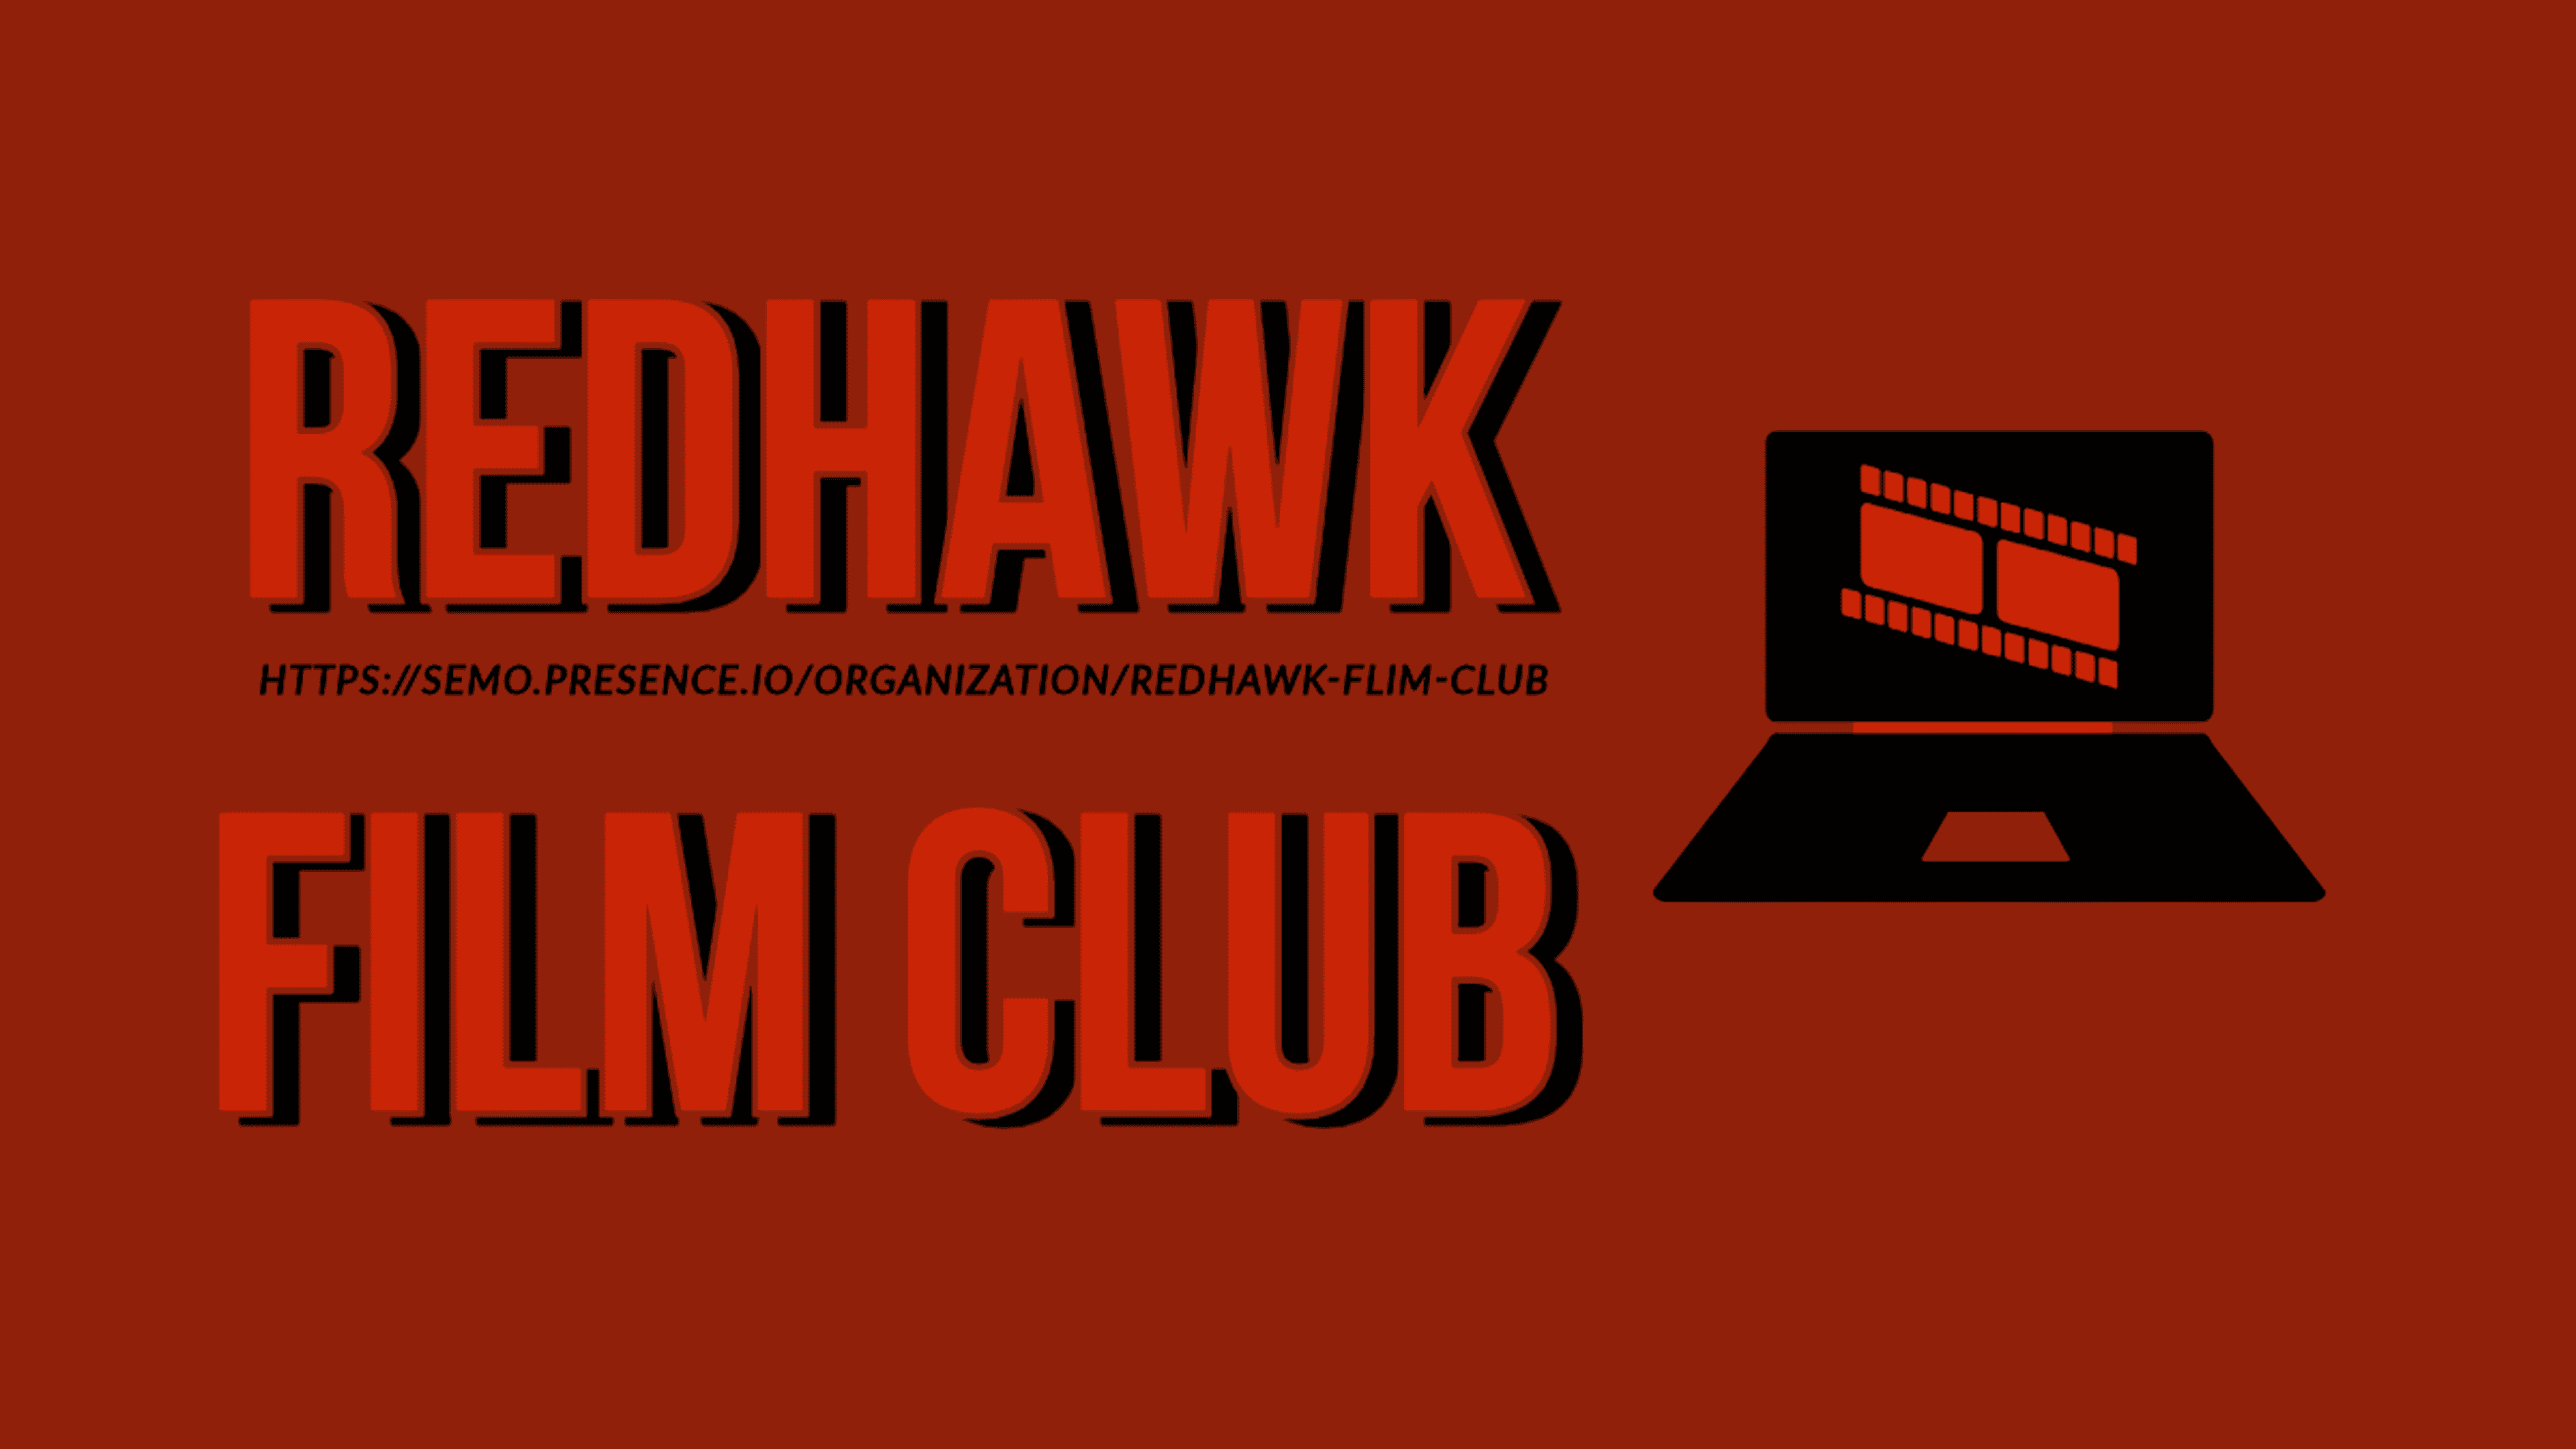 Students become filmmakers with the Redhawk Film Club